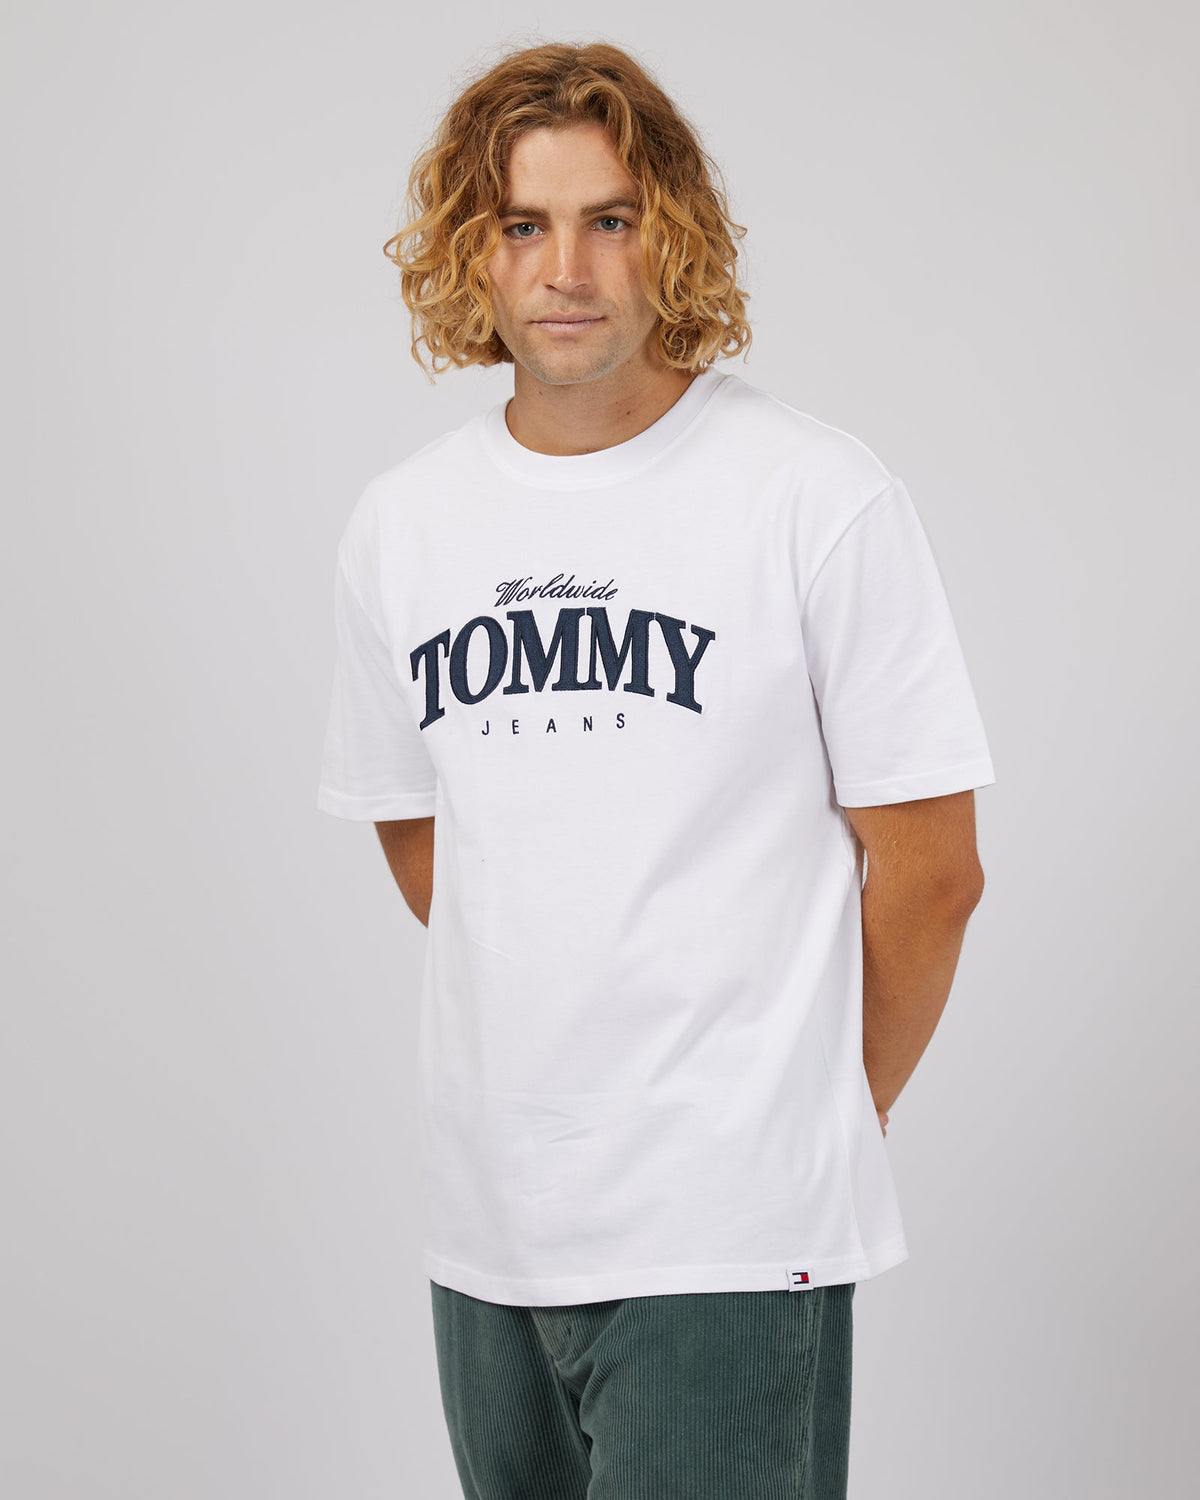 Tommy Hilfiger-Varsity Luxe Tee White-Edge Clothing